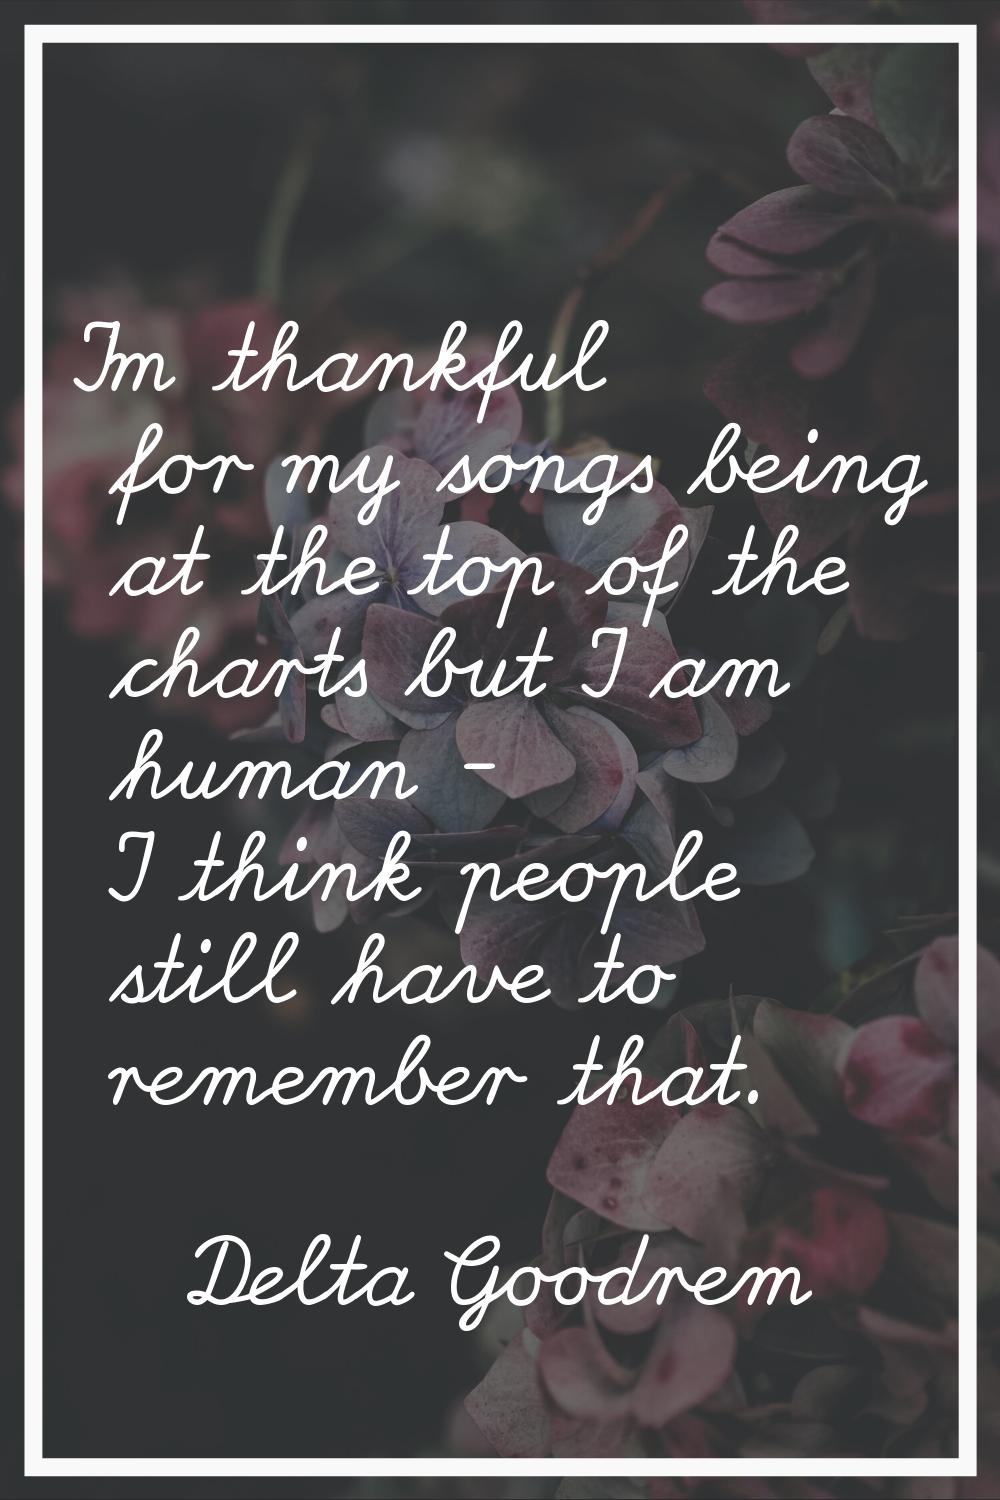 I'm thankful for my songs being at the top of the charts but I am human - I think people still have